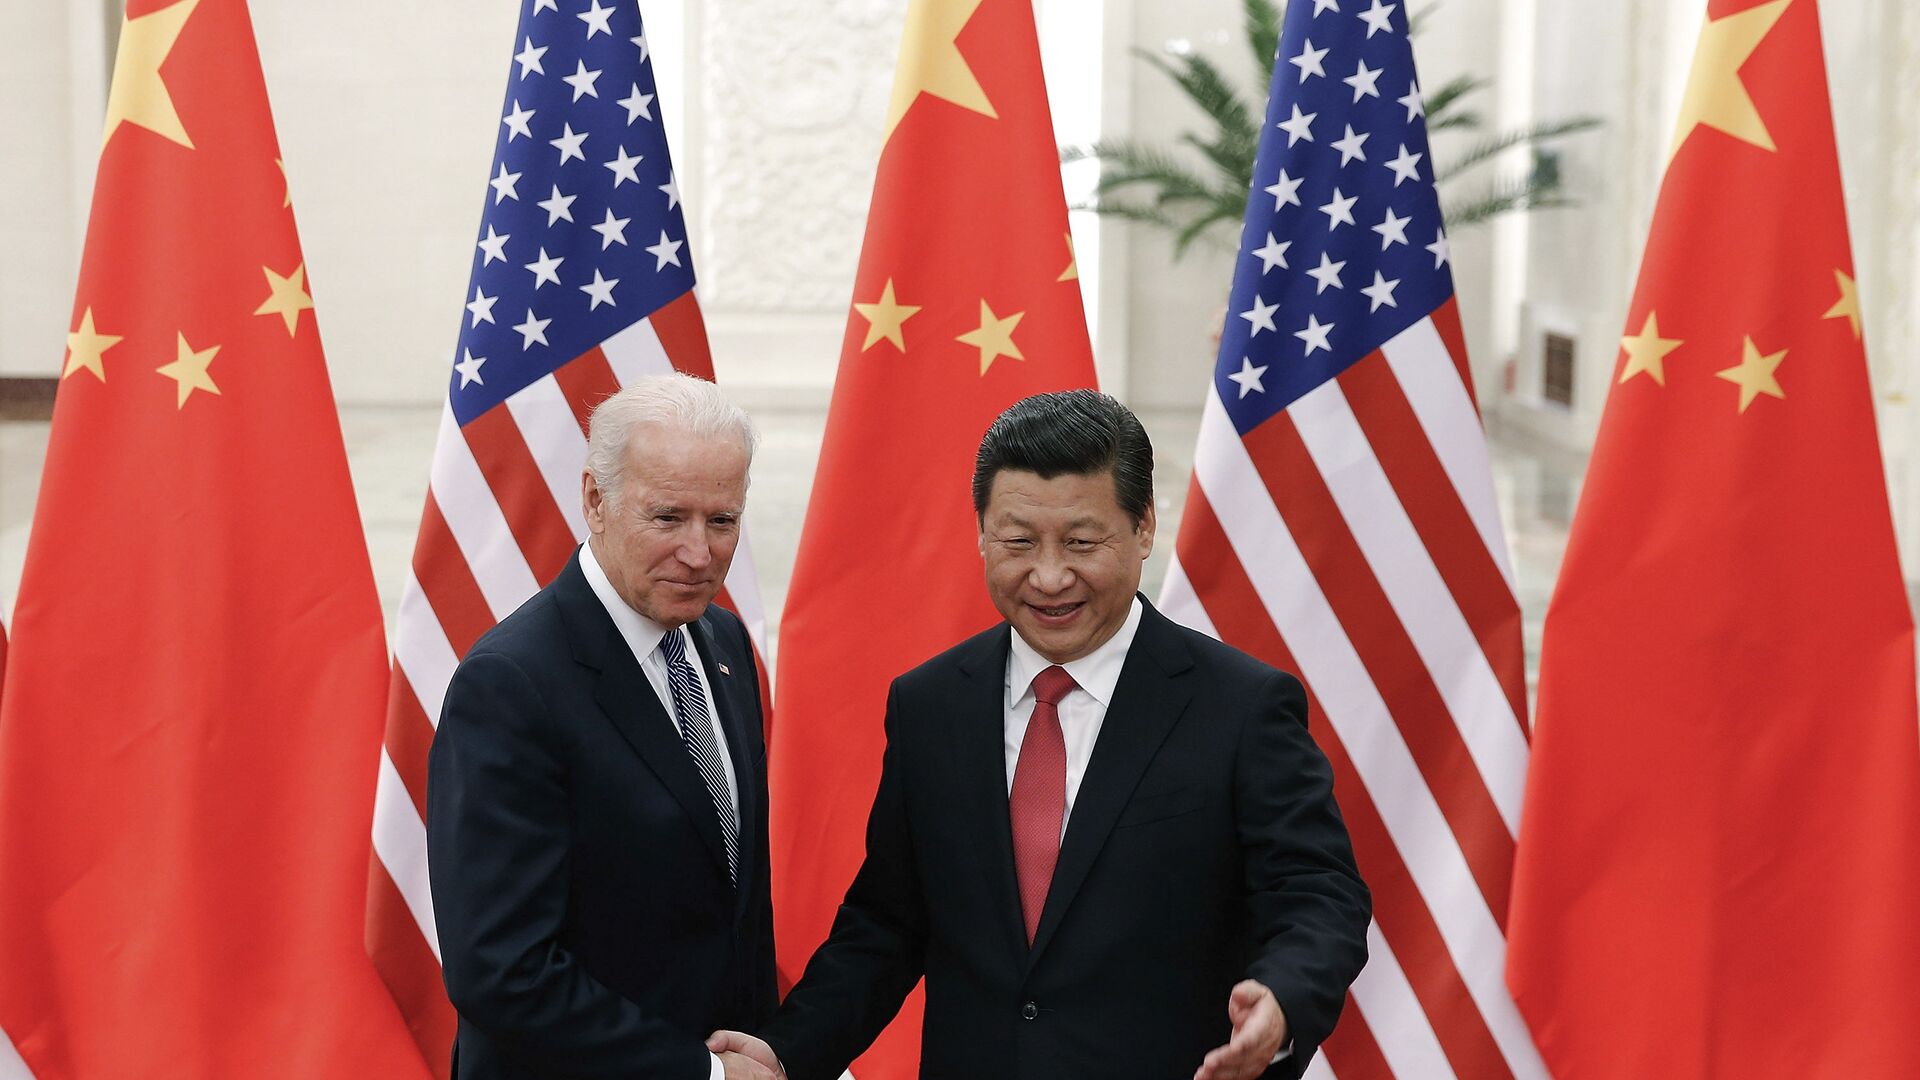 FILE - In this Dec. 4, 2013, file photo, Chinese President Xi Jinping, right, shakes hands with then U.S. Vice President Joe Biden as they pose for photos at the Great Hall of the People in Beijing. - Sputnik International, 1920, 10.09.2021